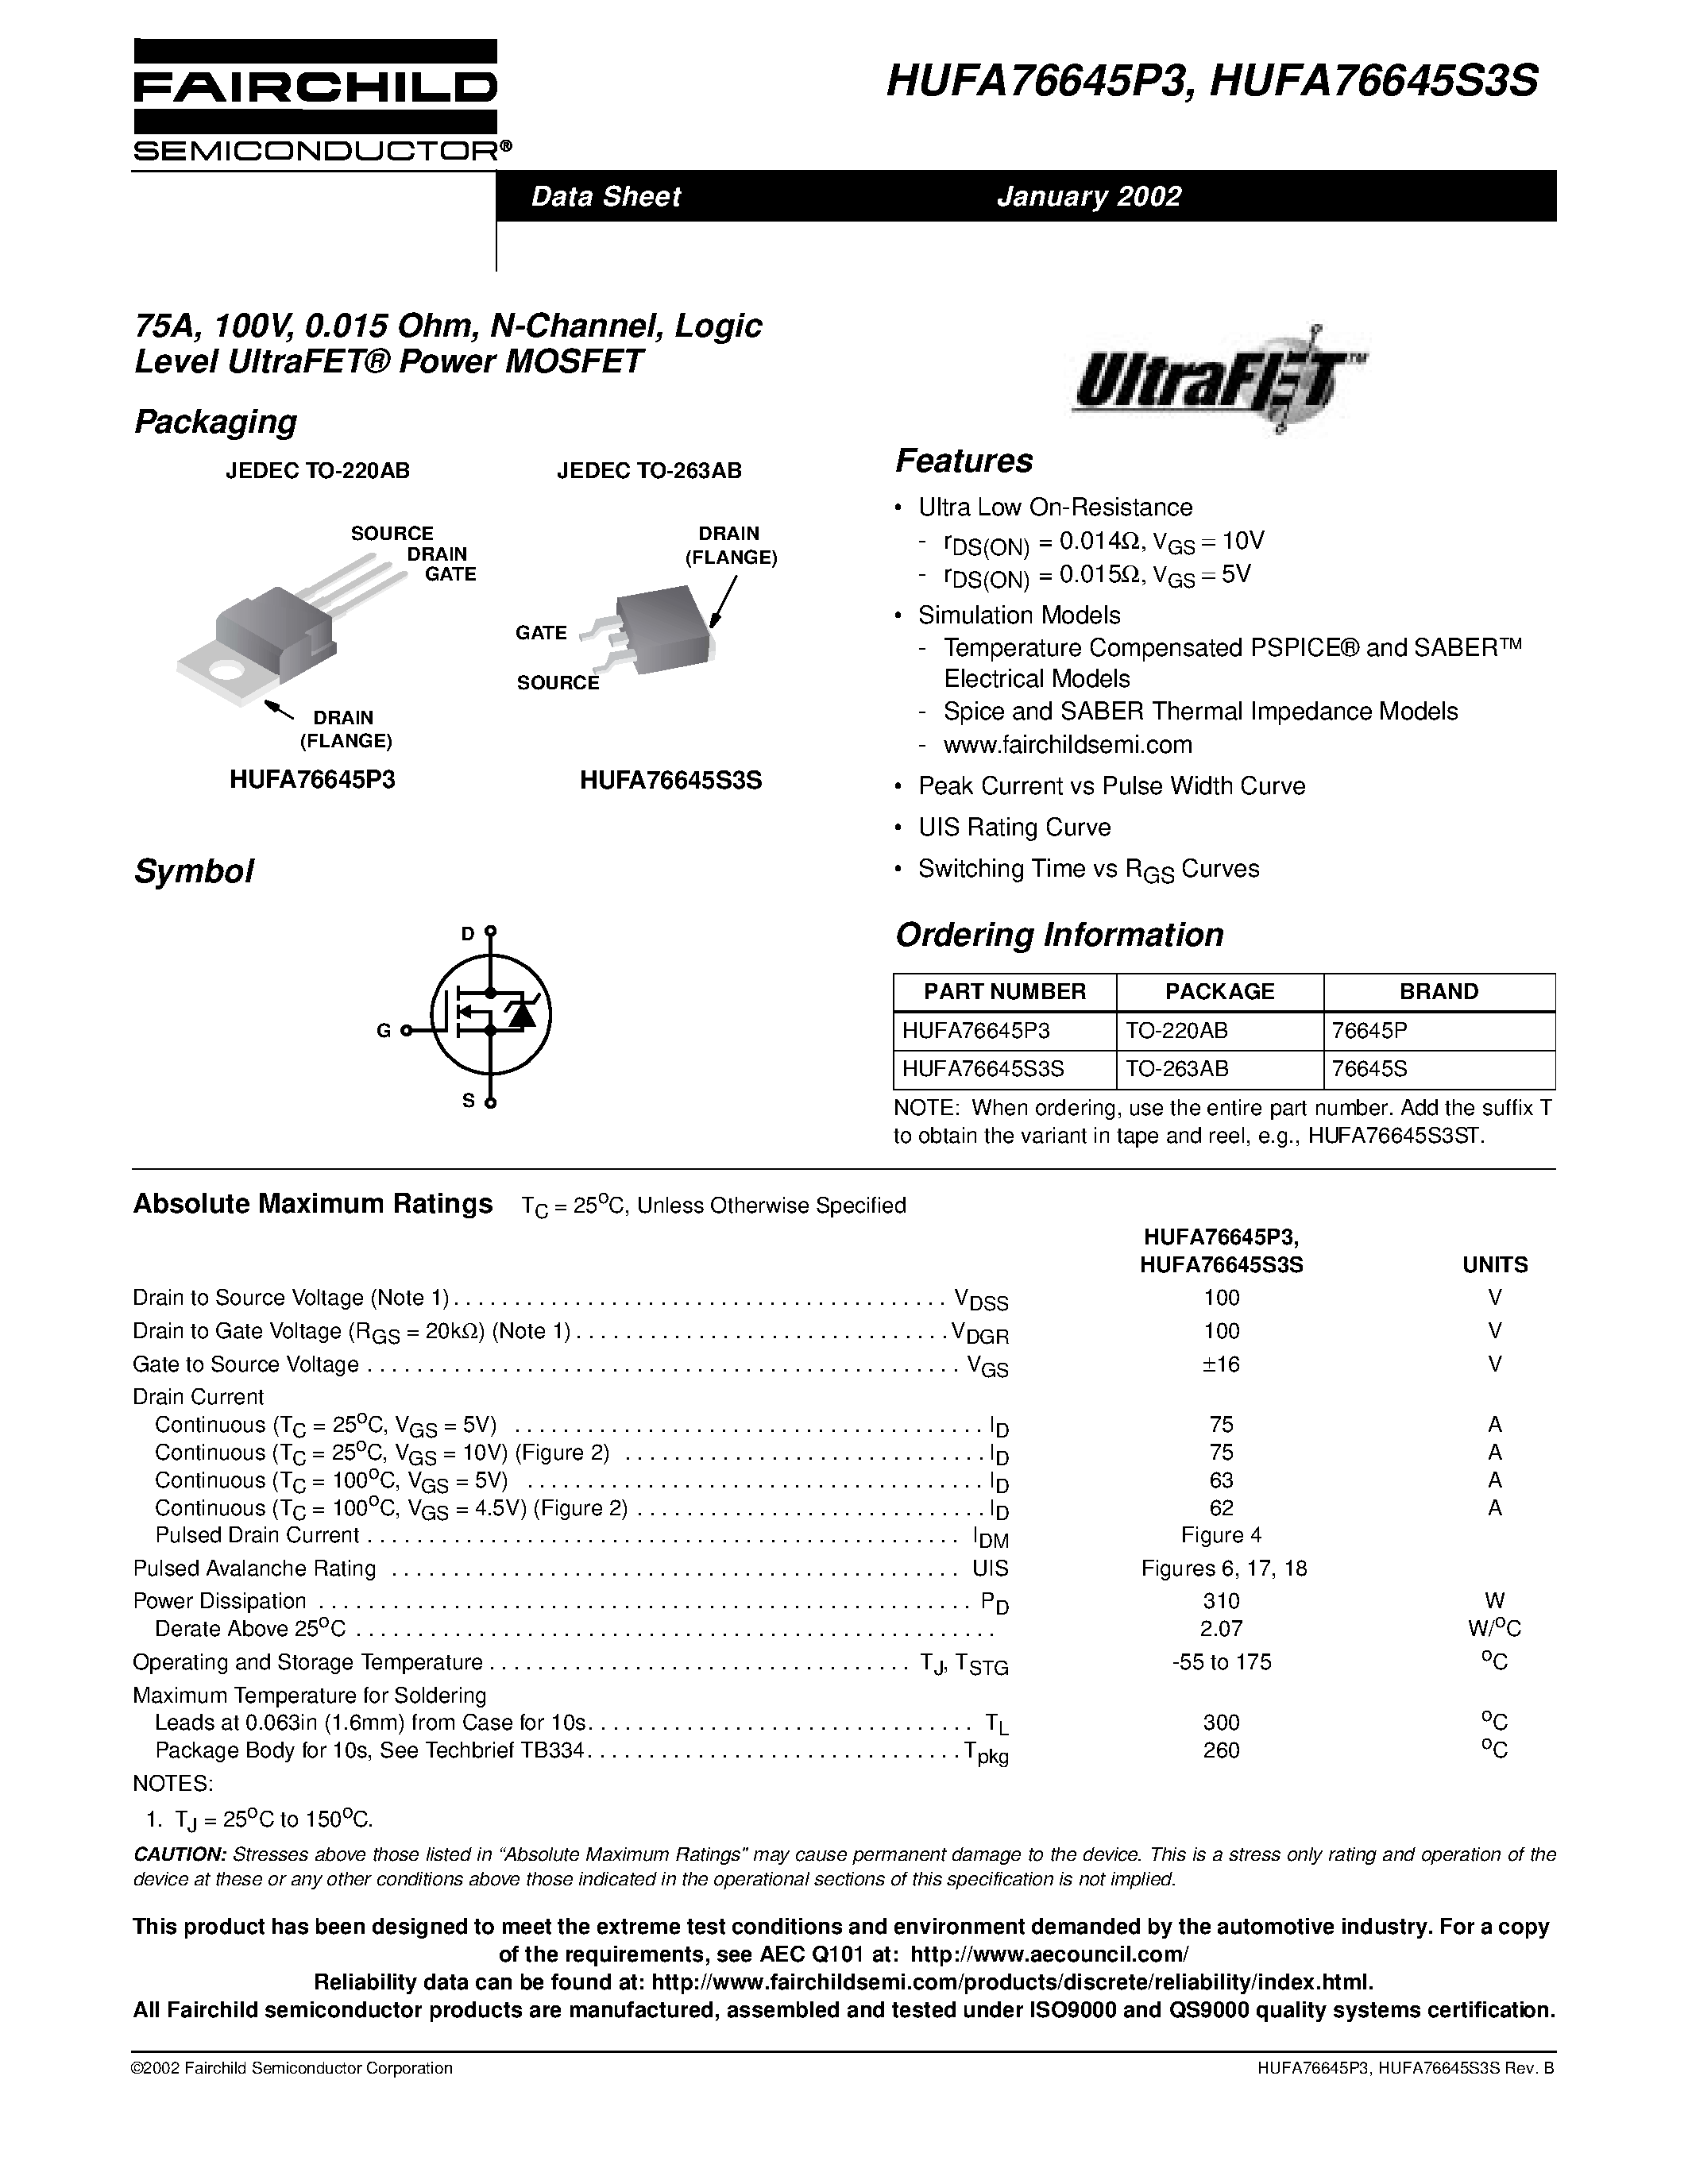 Datasheet HUFA76645S3S - 75A/ 100V/ 0.015 Ohm/ N-Channel/ Logic Level UltraFET Power MOSFET page 1